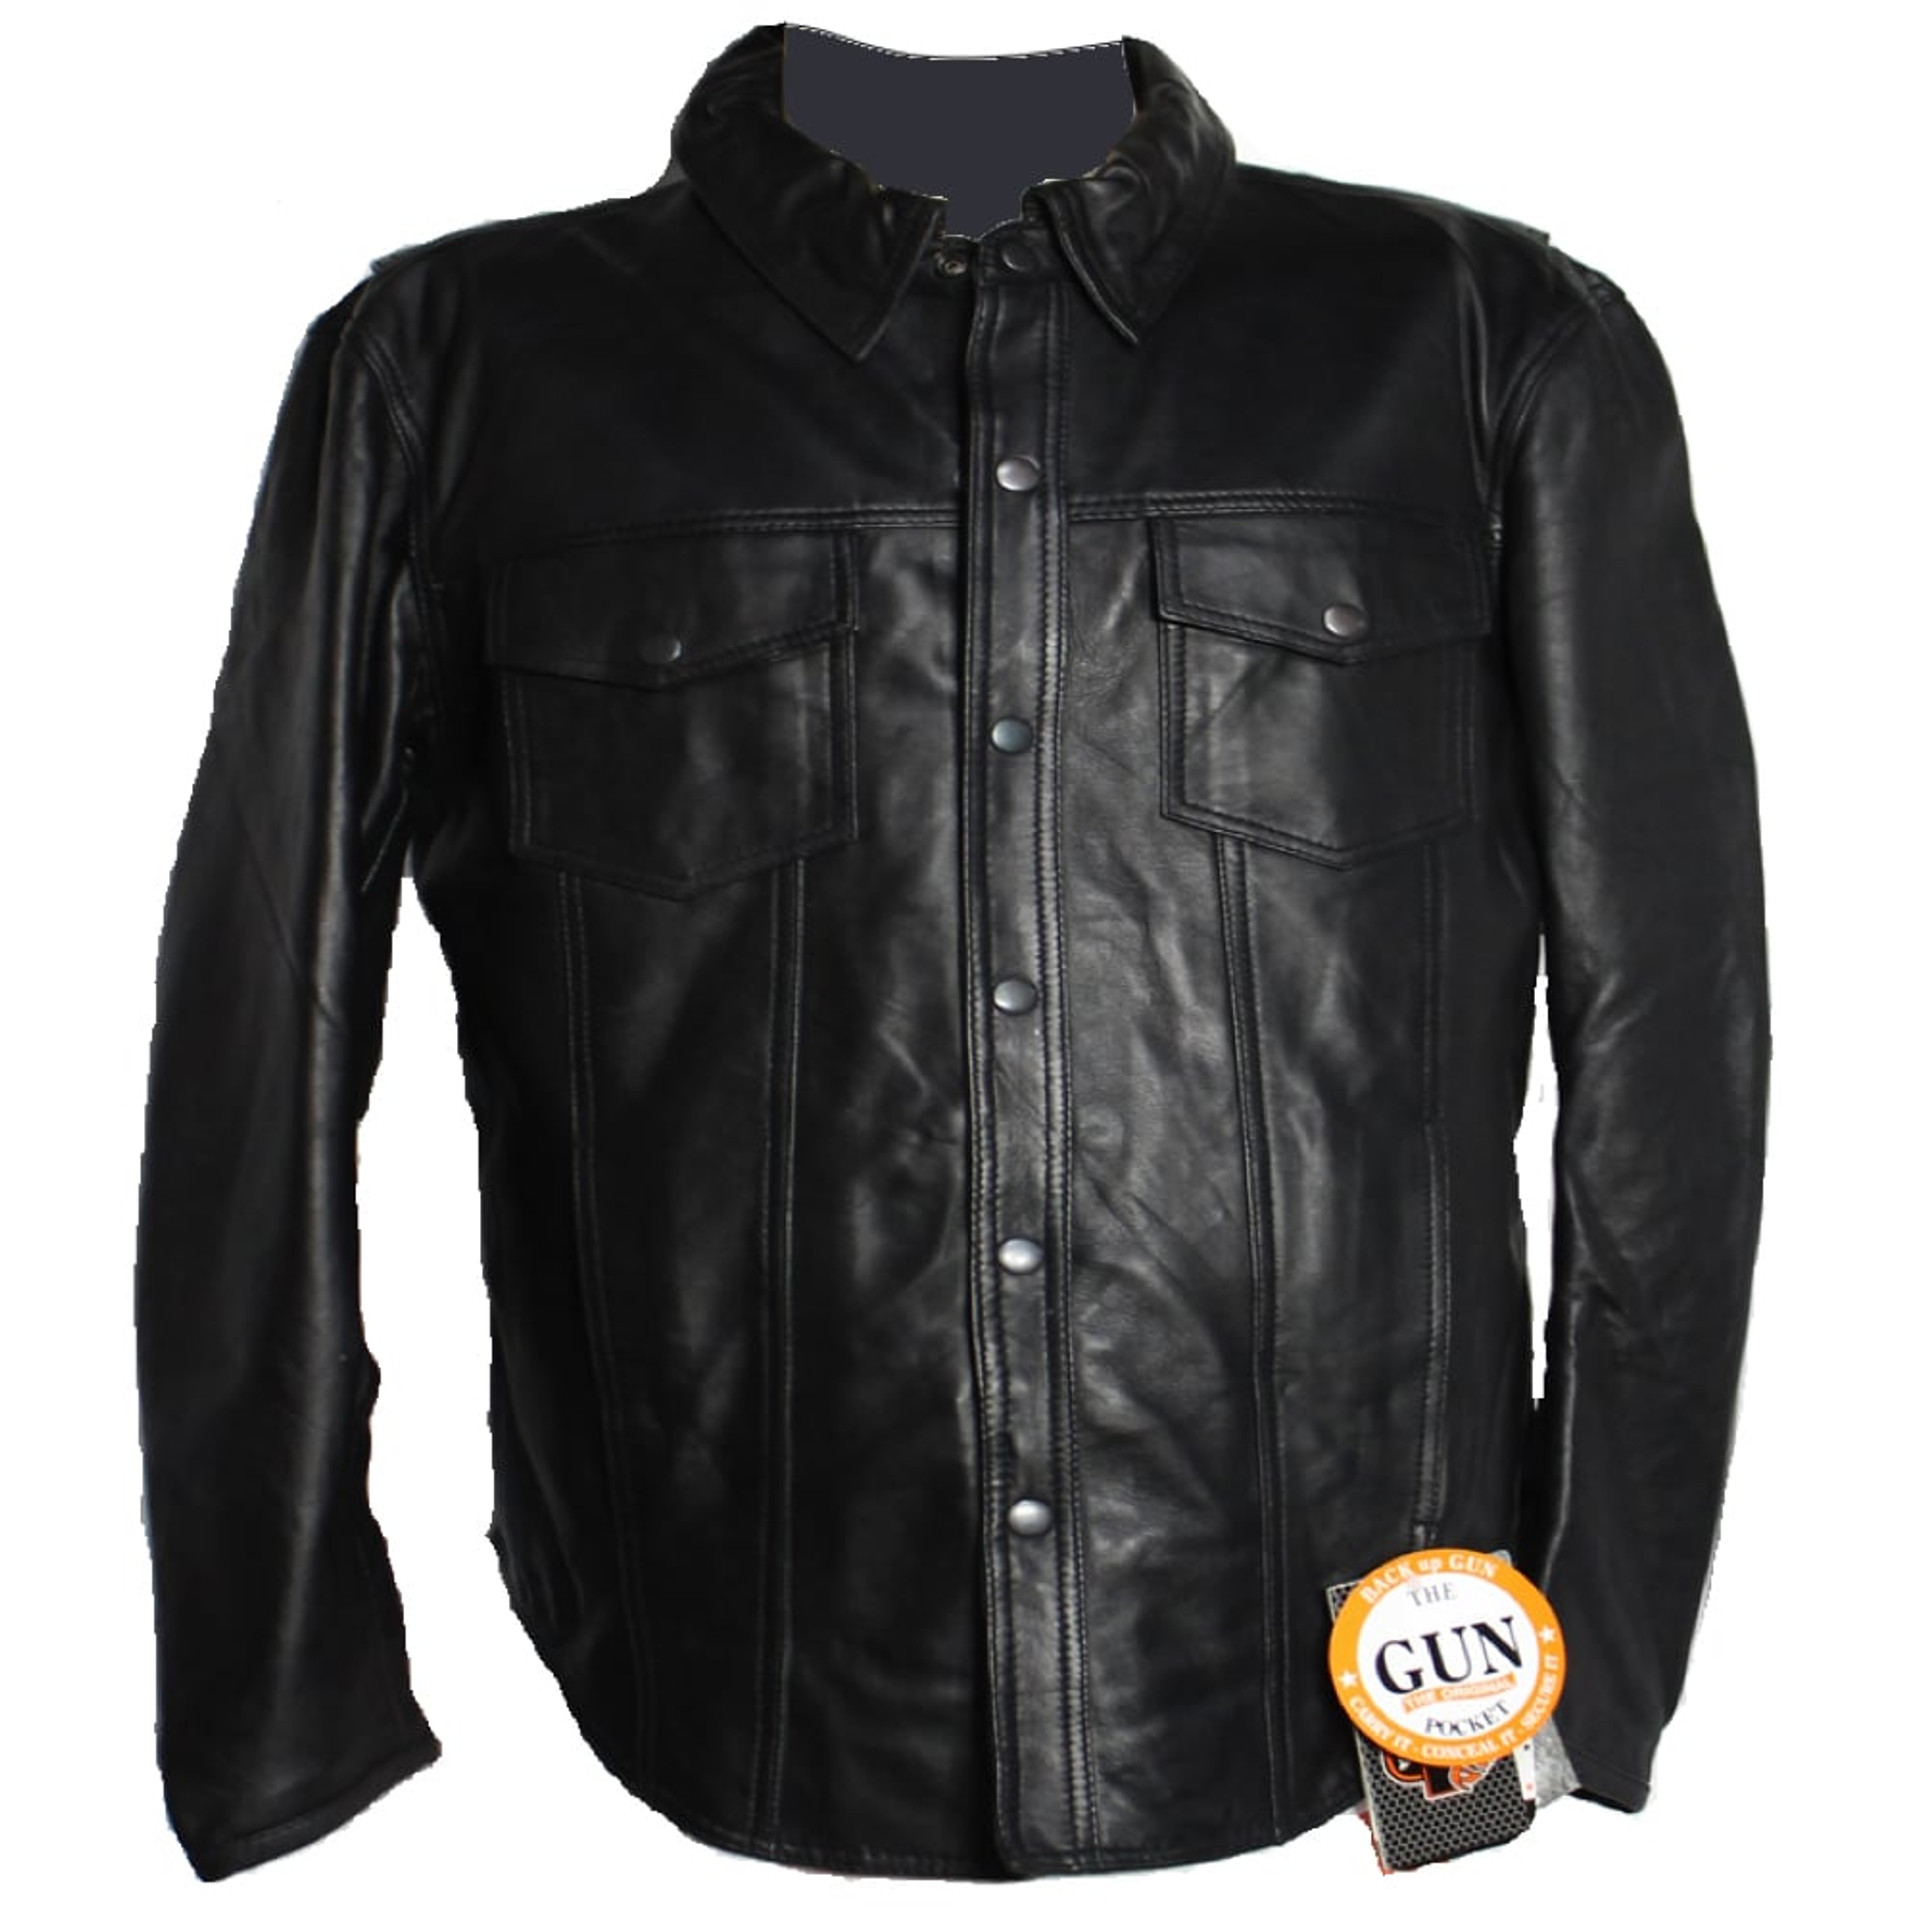 Men's Riding Gear - Men's Leather Jackets - Papa's Motorcycle Apparel